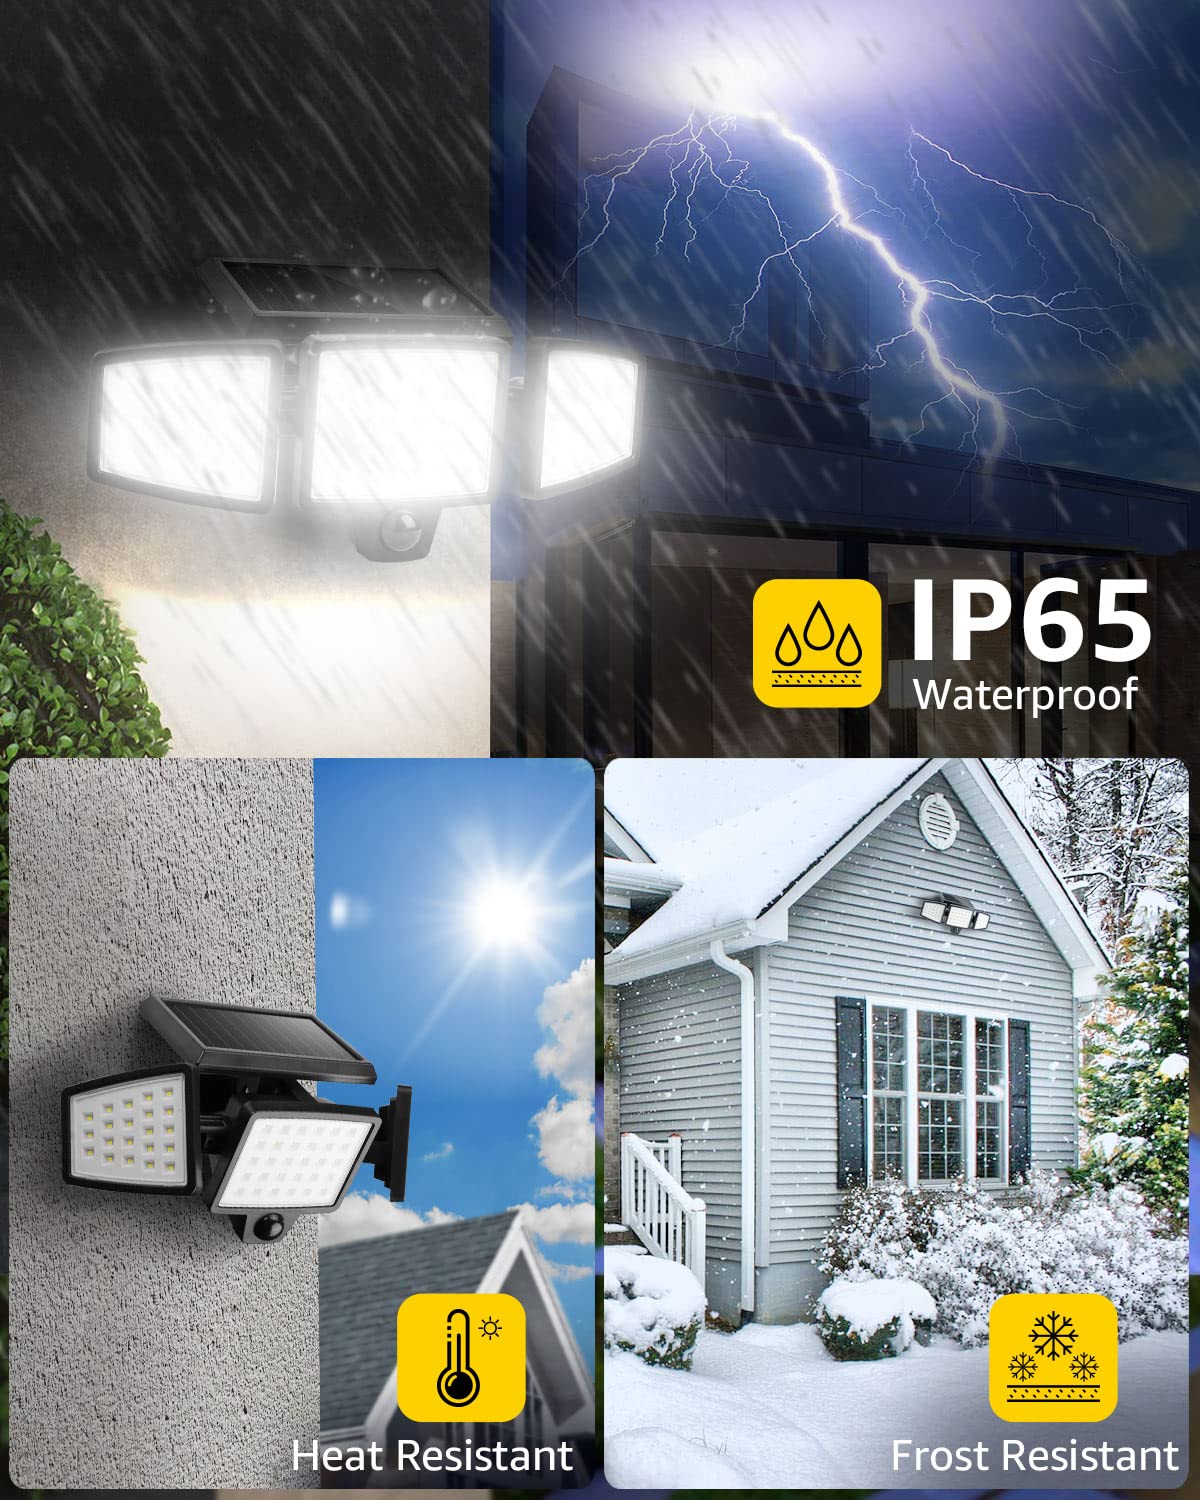 LE Solar Lights for Outside, Motion Sensor Outdoor Lights, WL4000 High Brightness, 3 Adjustable Heads 270° Wide Lighting Angle, IP65 Waterproof, Wireless Wall Lamp for Porch Yard Garage, 2 Packs